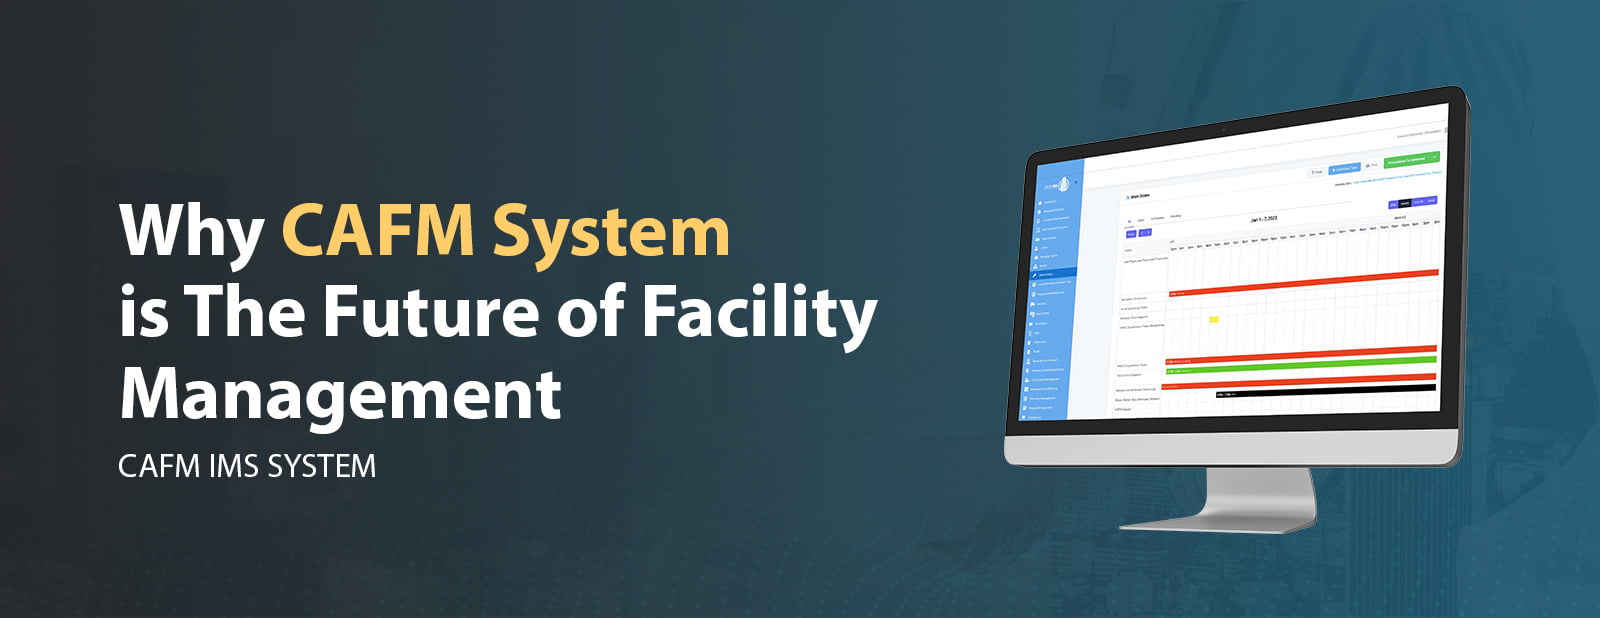 Why CAFM System is The Future of Facility Management